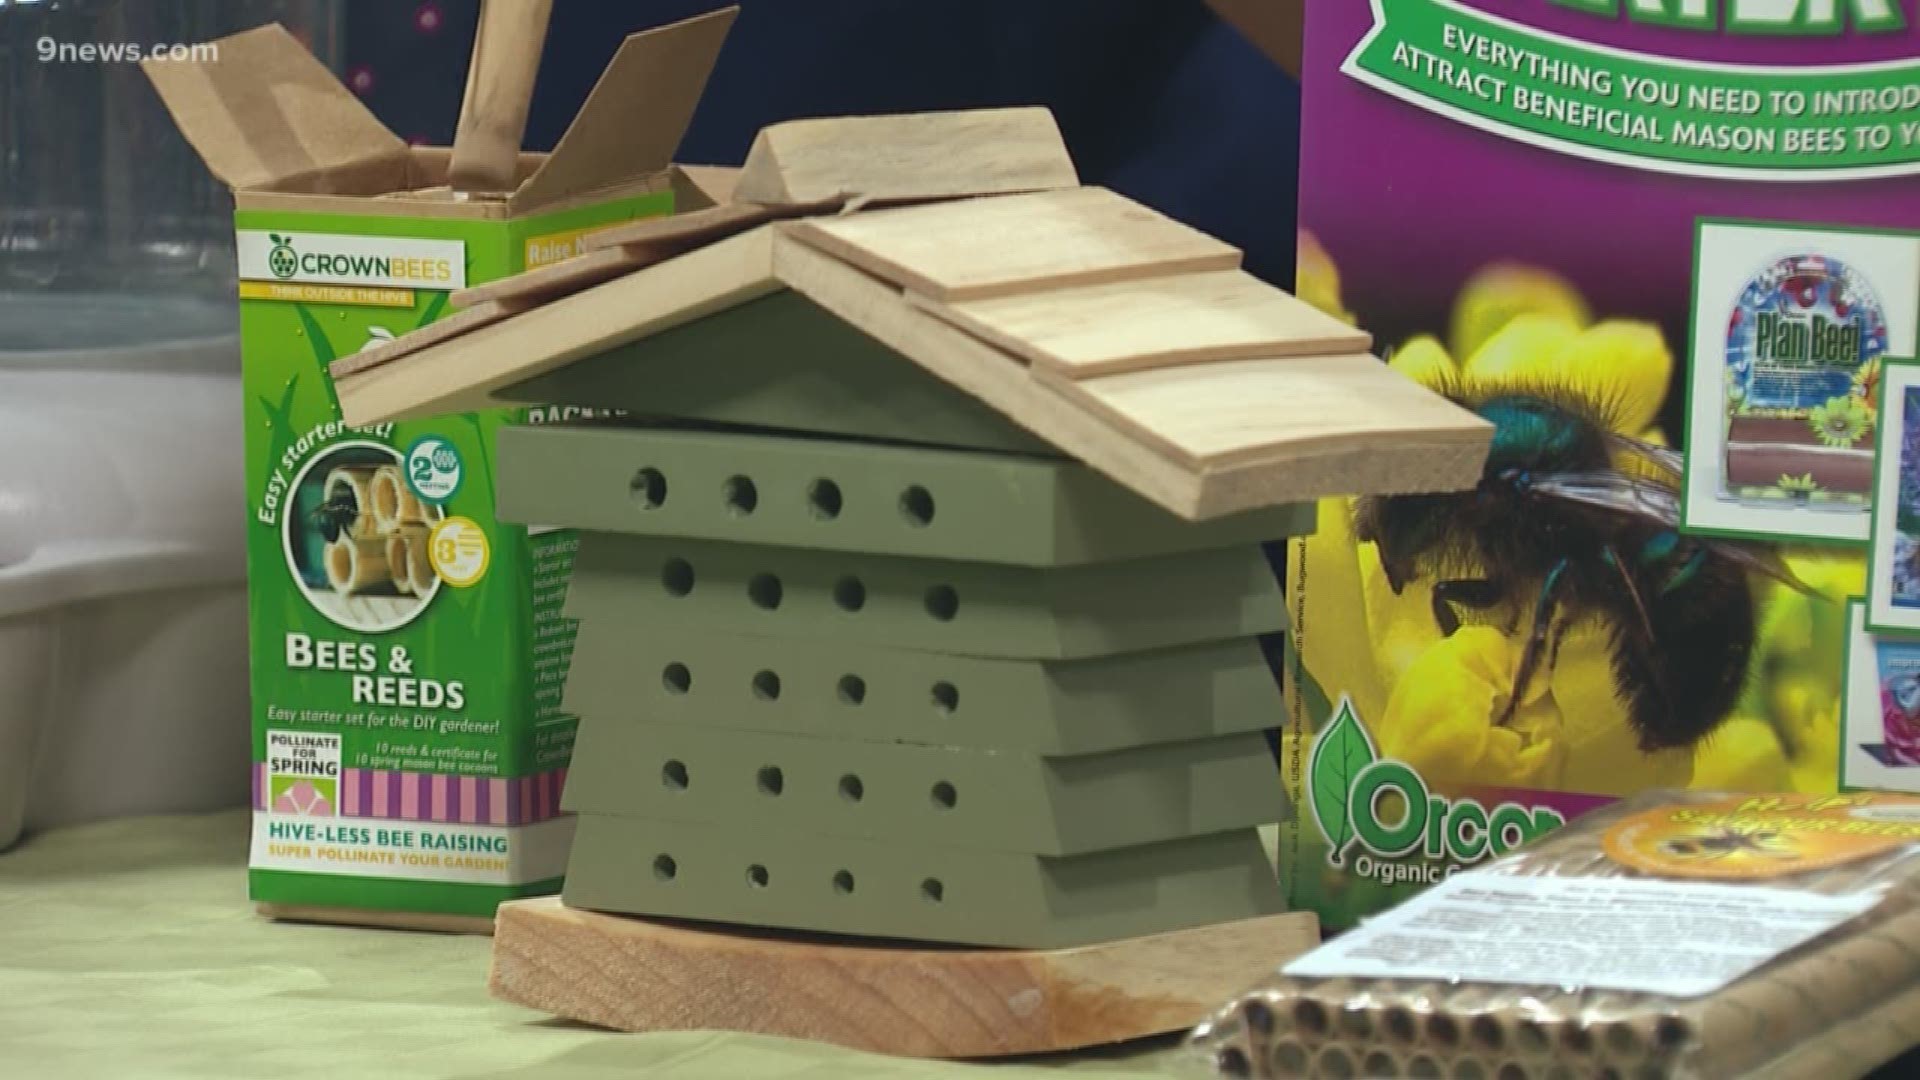 Julie Peterson talks about how you can make your garden more welcoming for pollinating mason bees, which are especially good for fruit trees